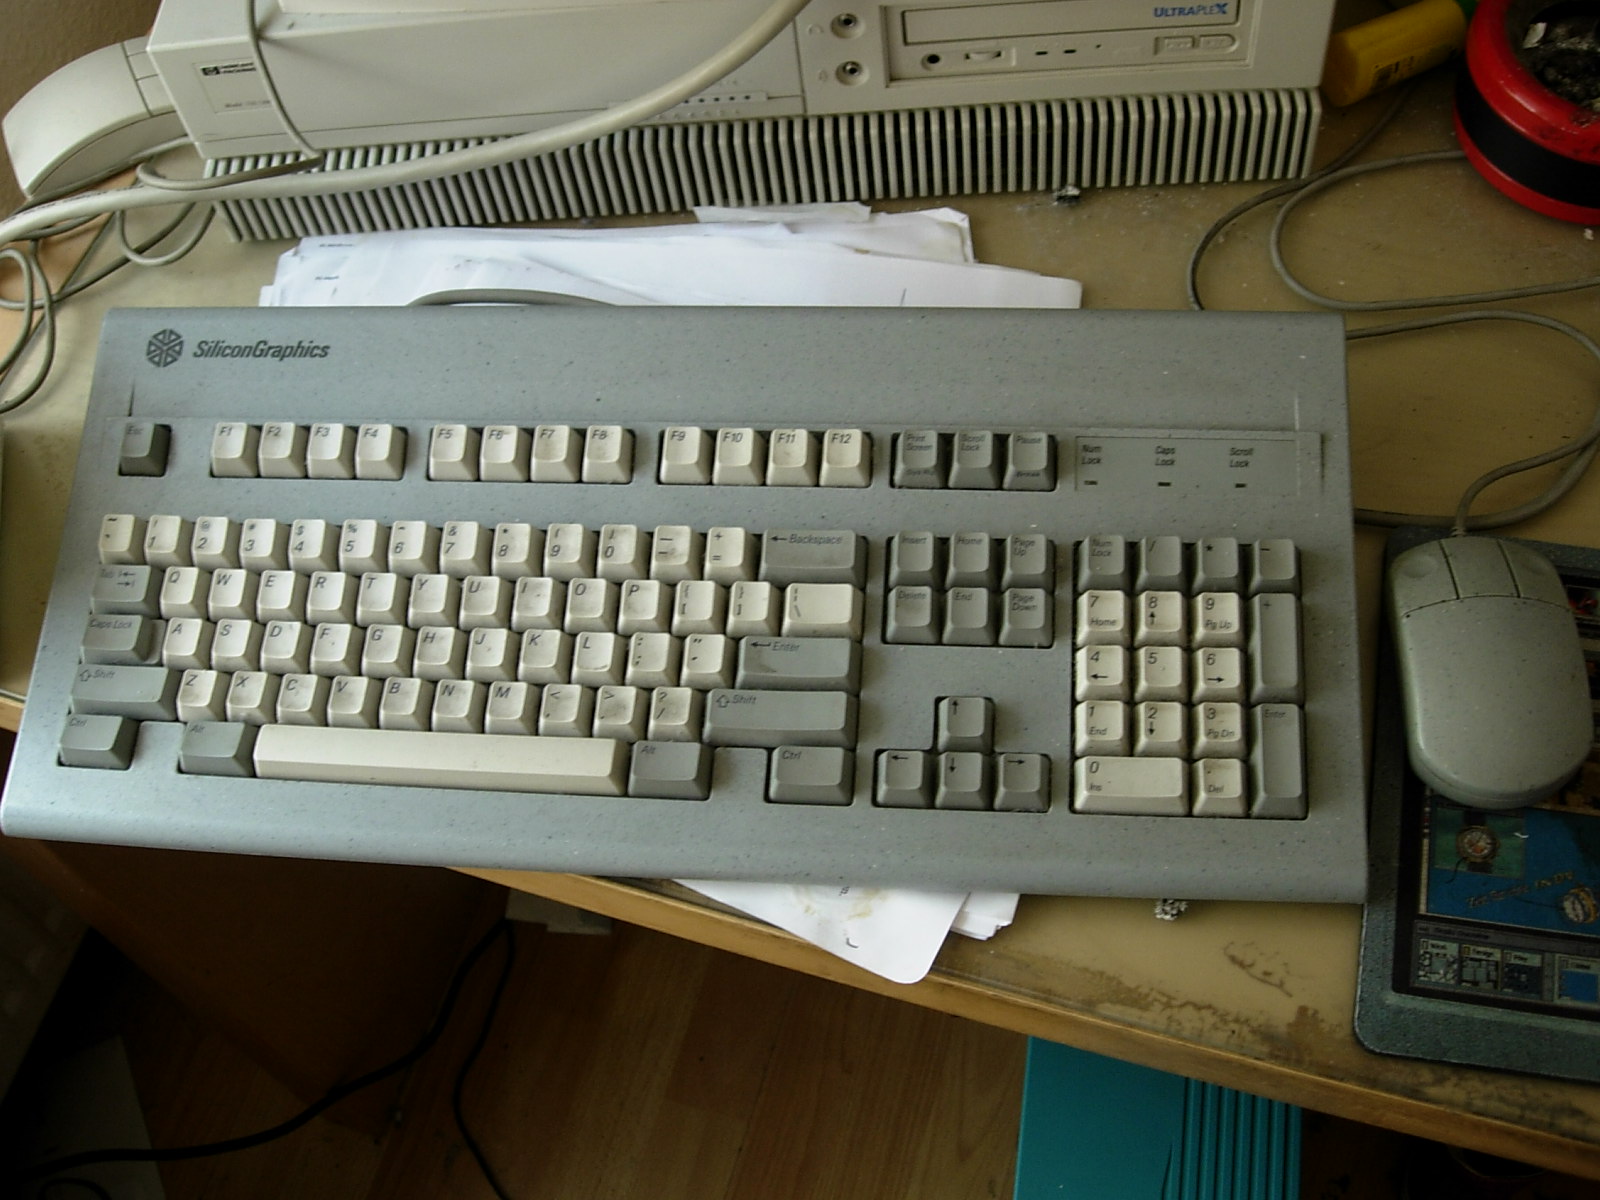 a computer keyboard and mouse sitting next to an older model computer